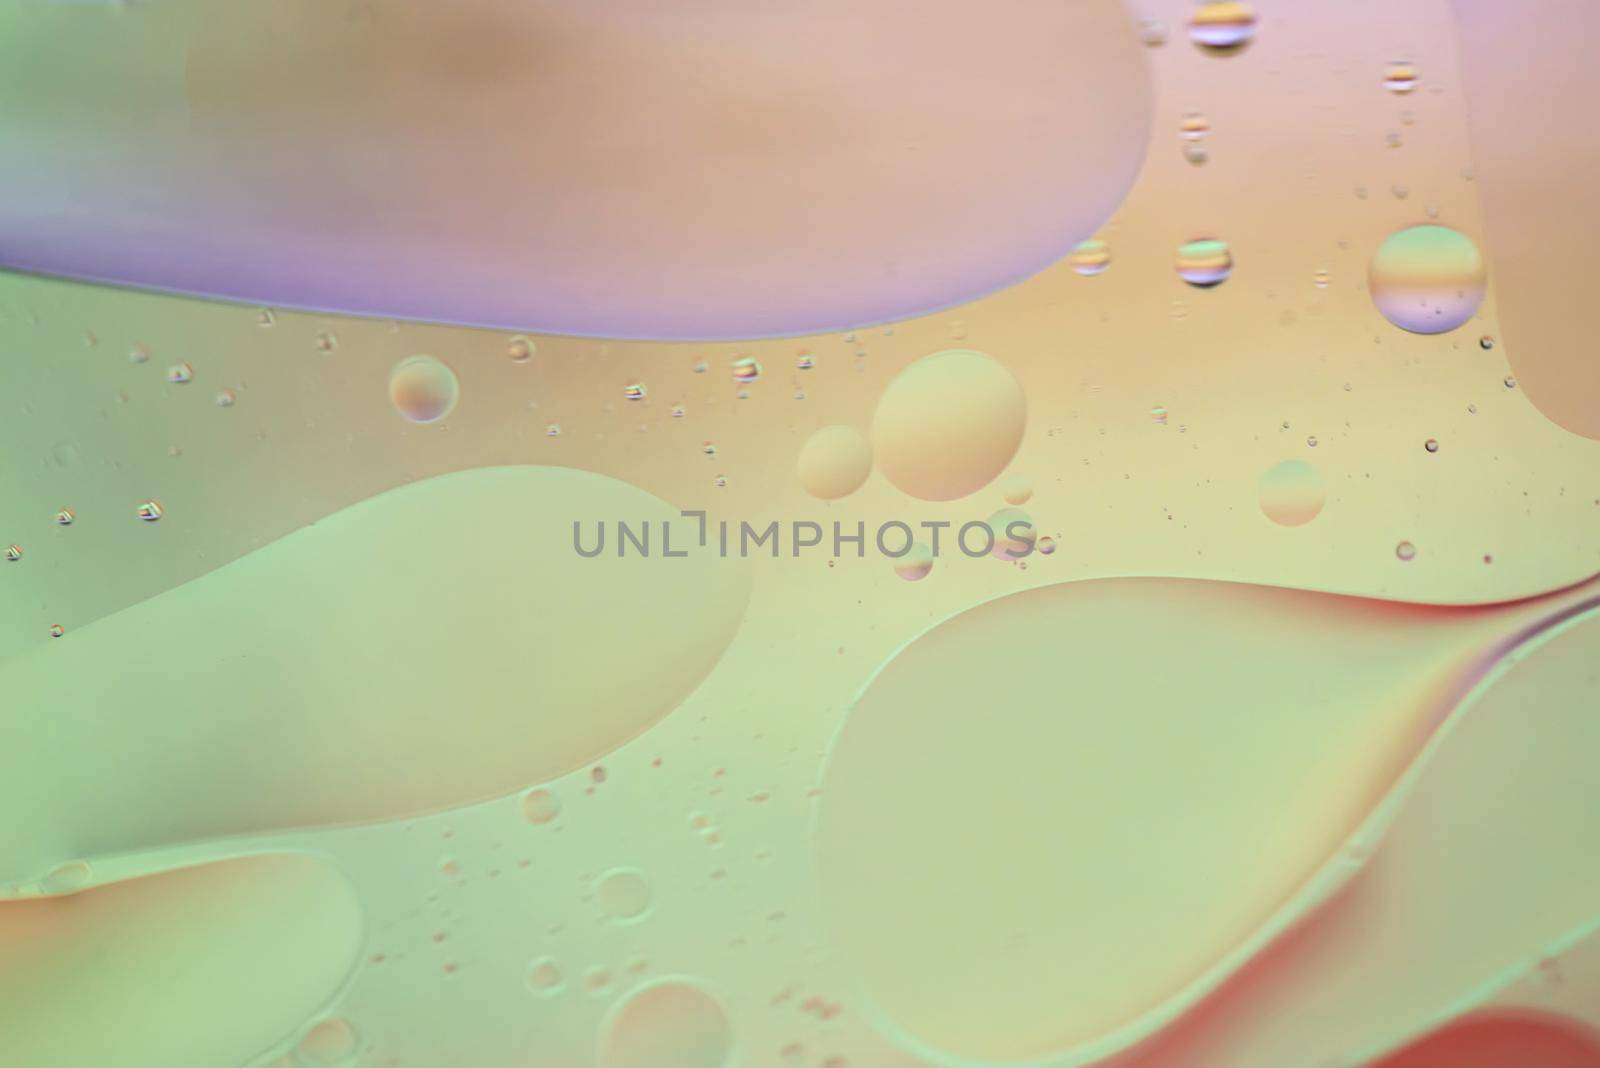 Defocused pastel colored abstract background picture made with oil, water and soap by anytka